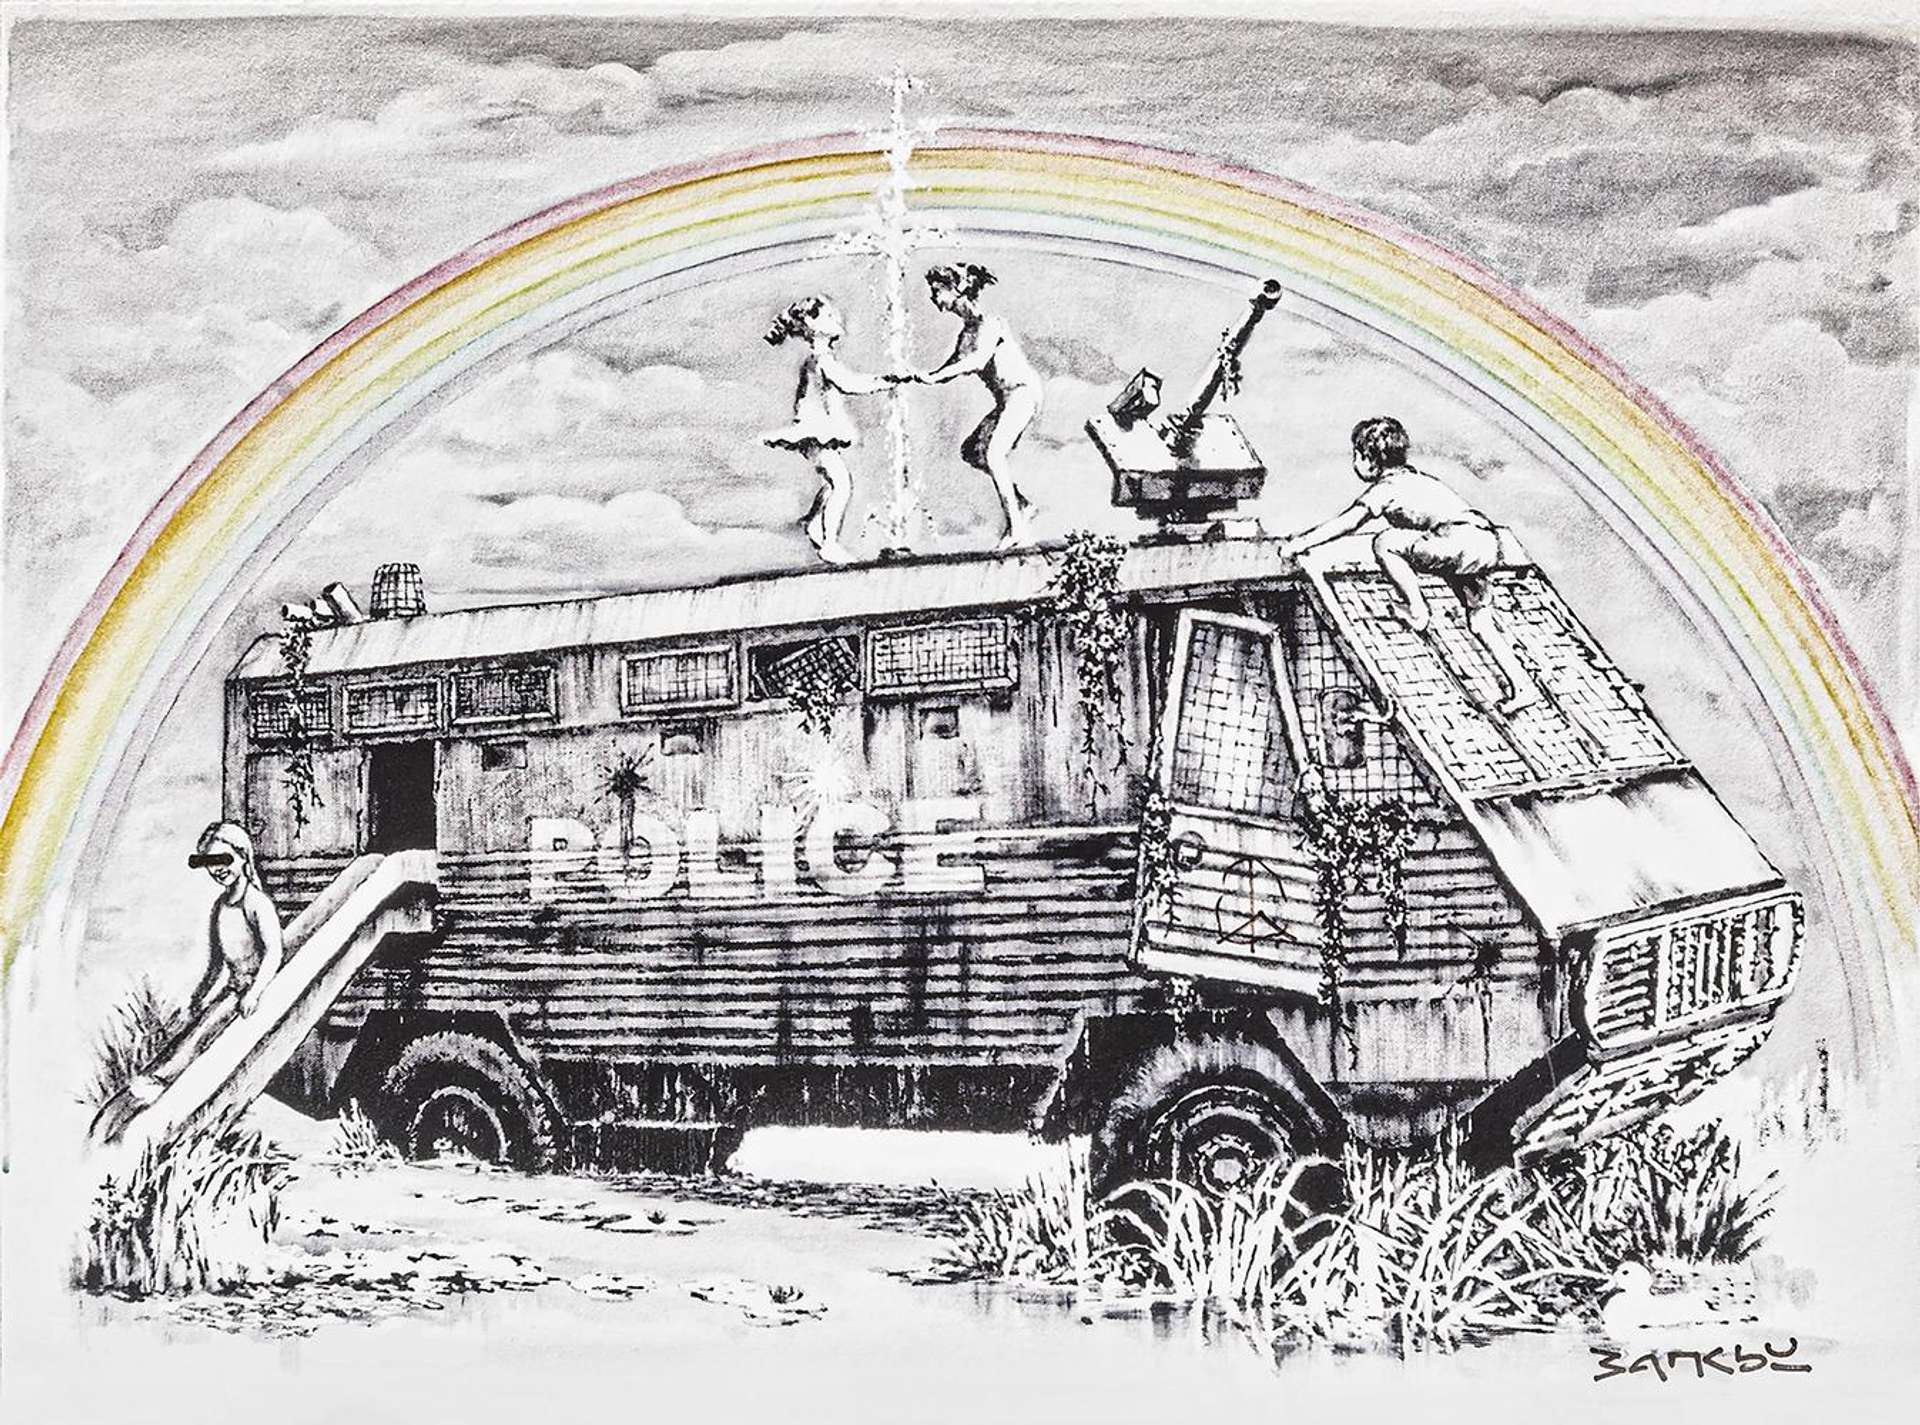 A digital print by Banksy depicting a police van that was turned into a quasi-adventure playground.